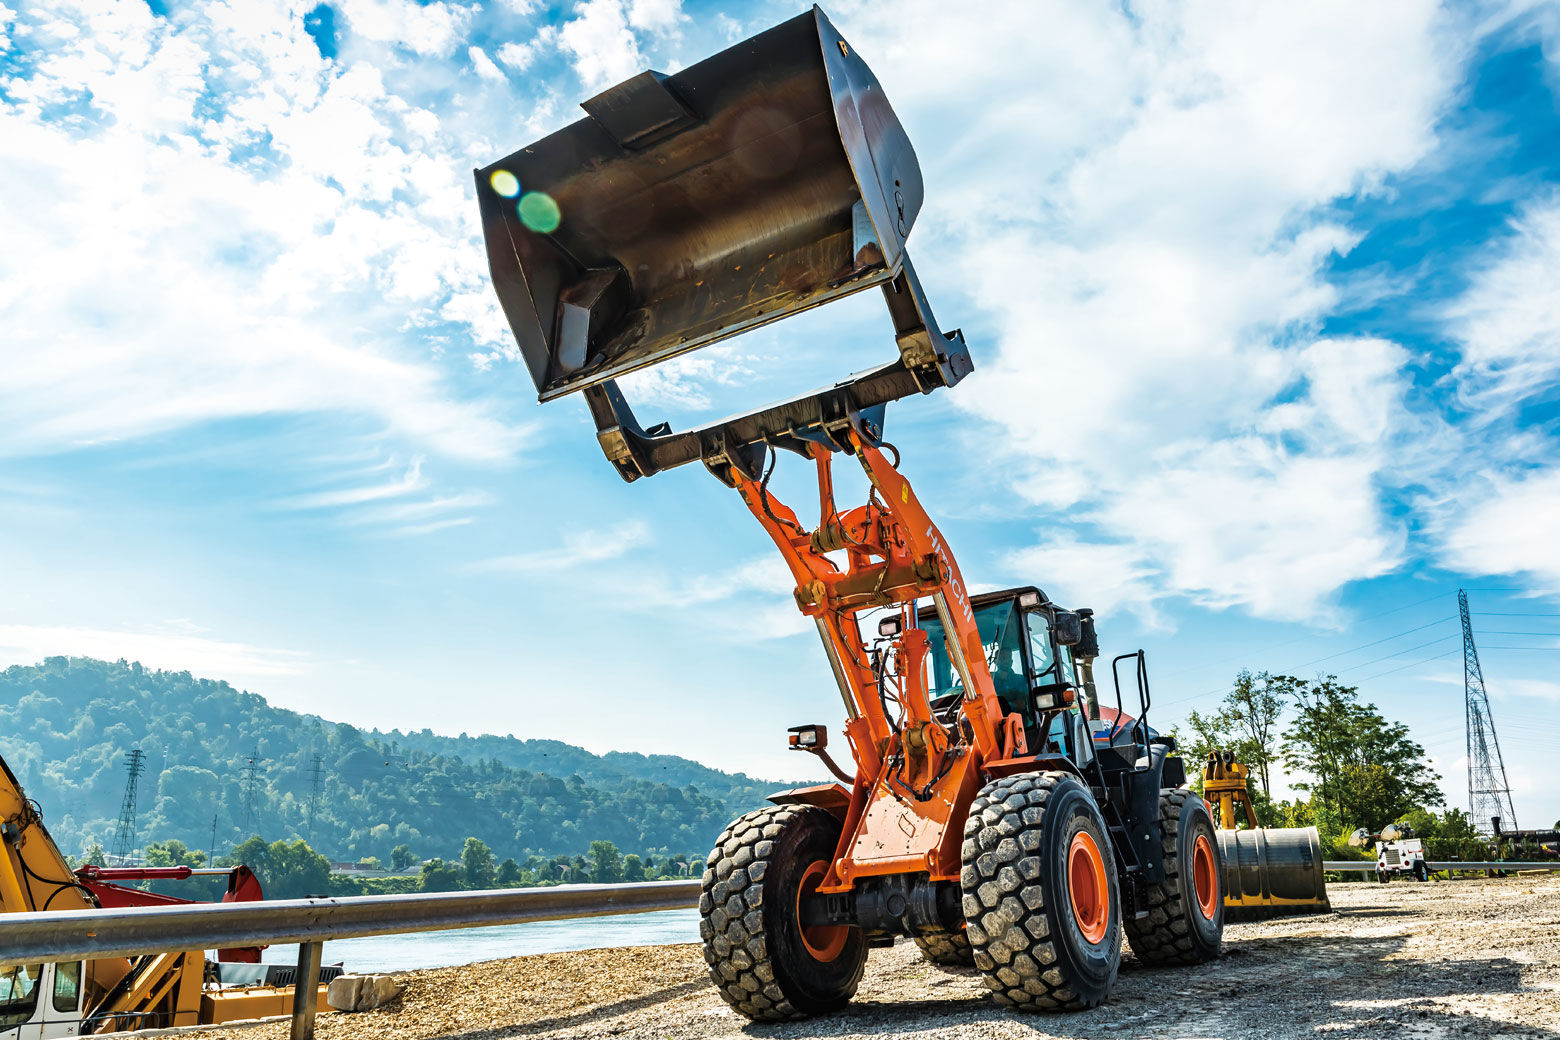 Wheel loader "ZW250" makes loading work efficient with smooth rotation of the bucket.